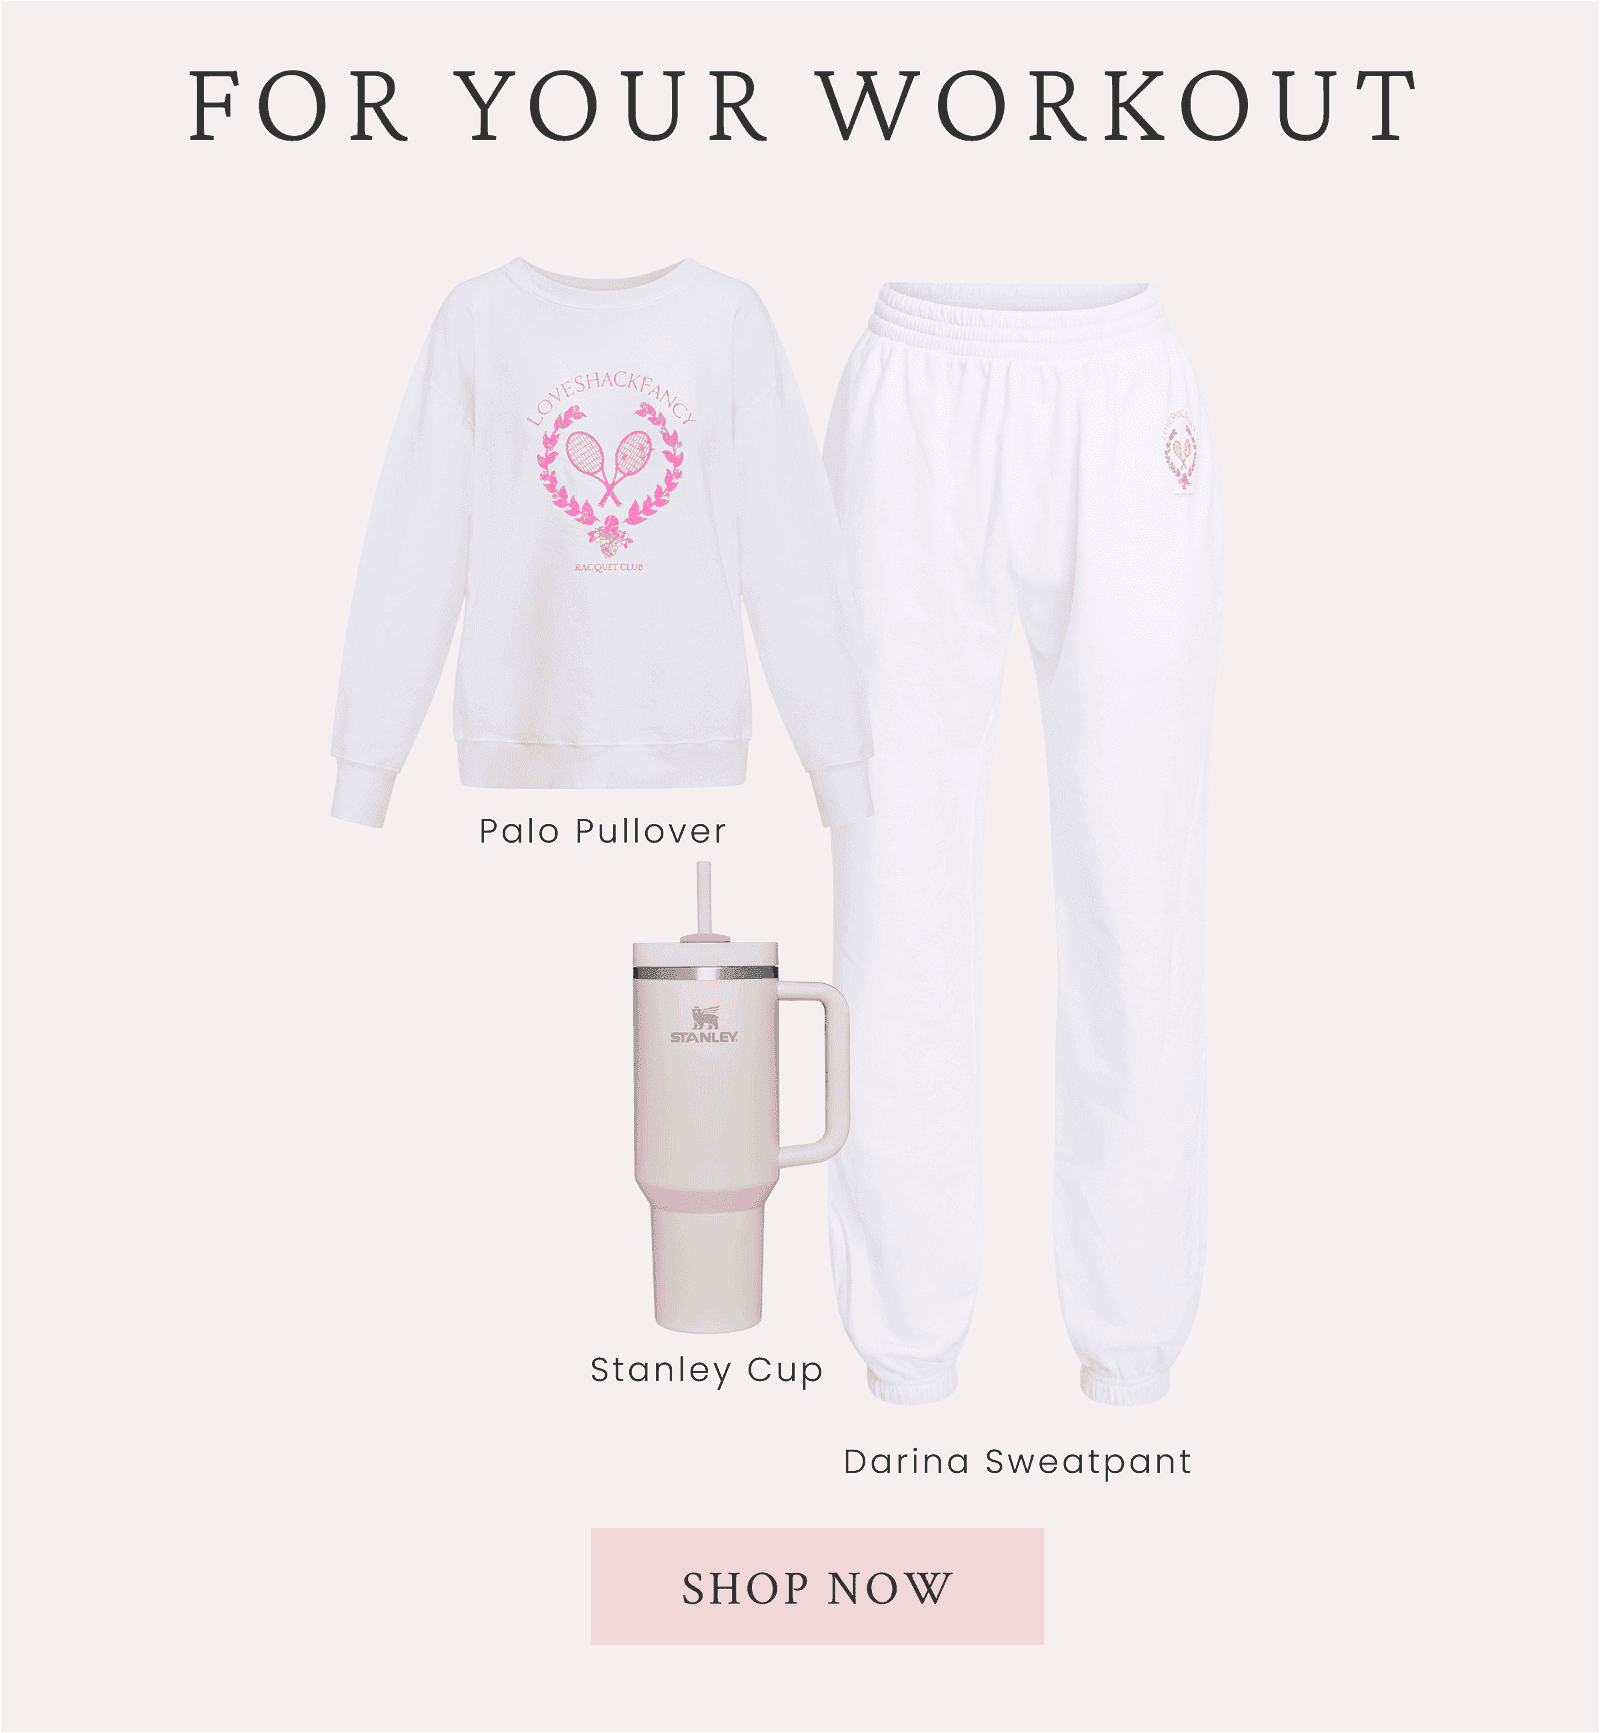 For your workout